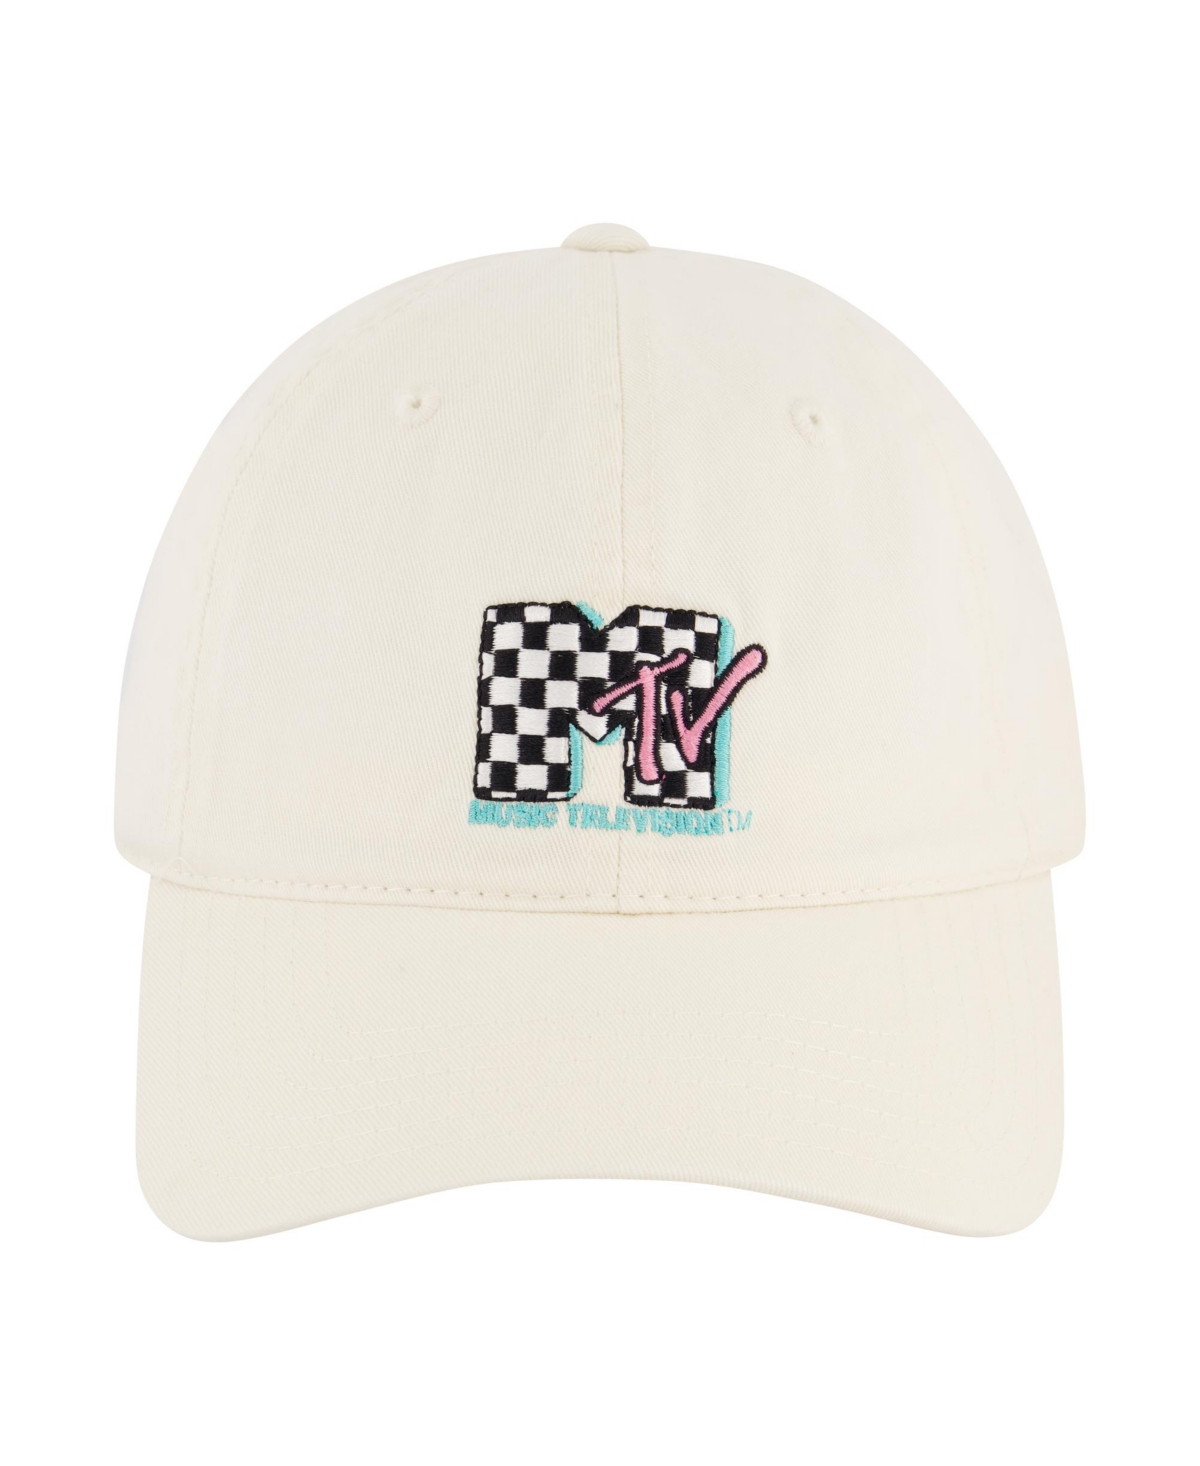 Nick Mtv Dad Cap With Embroidery Logo - Beige/khaki